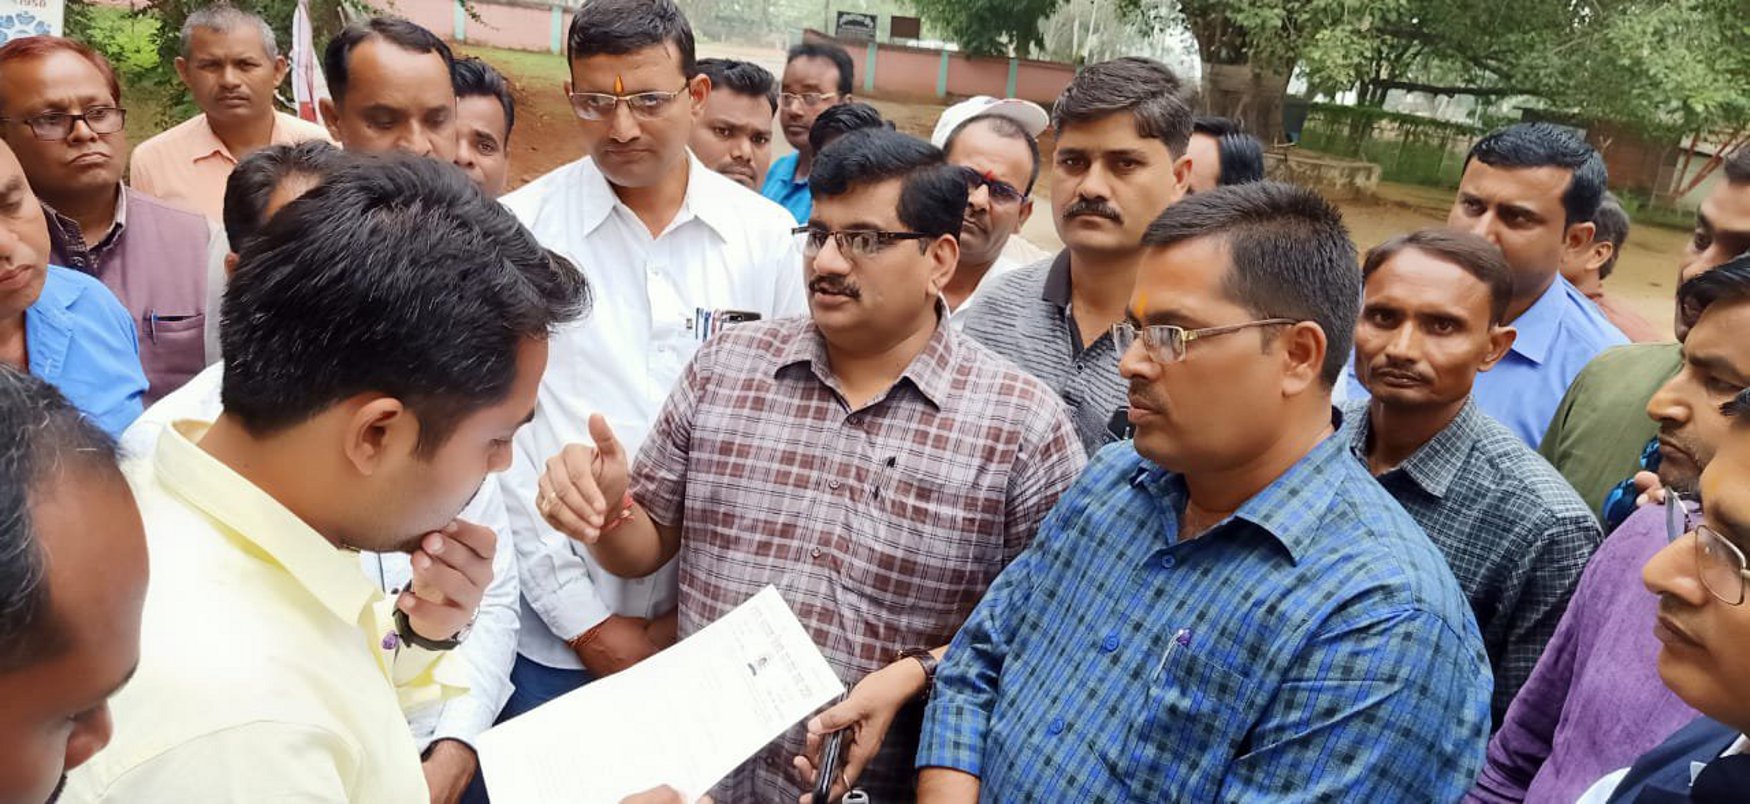 Azad teachers union submitted a memorandum protesting various demands